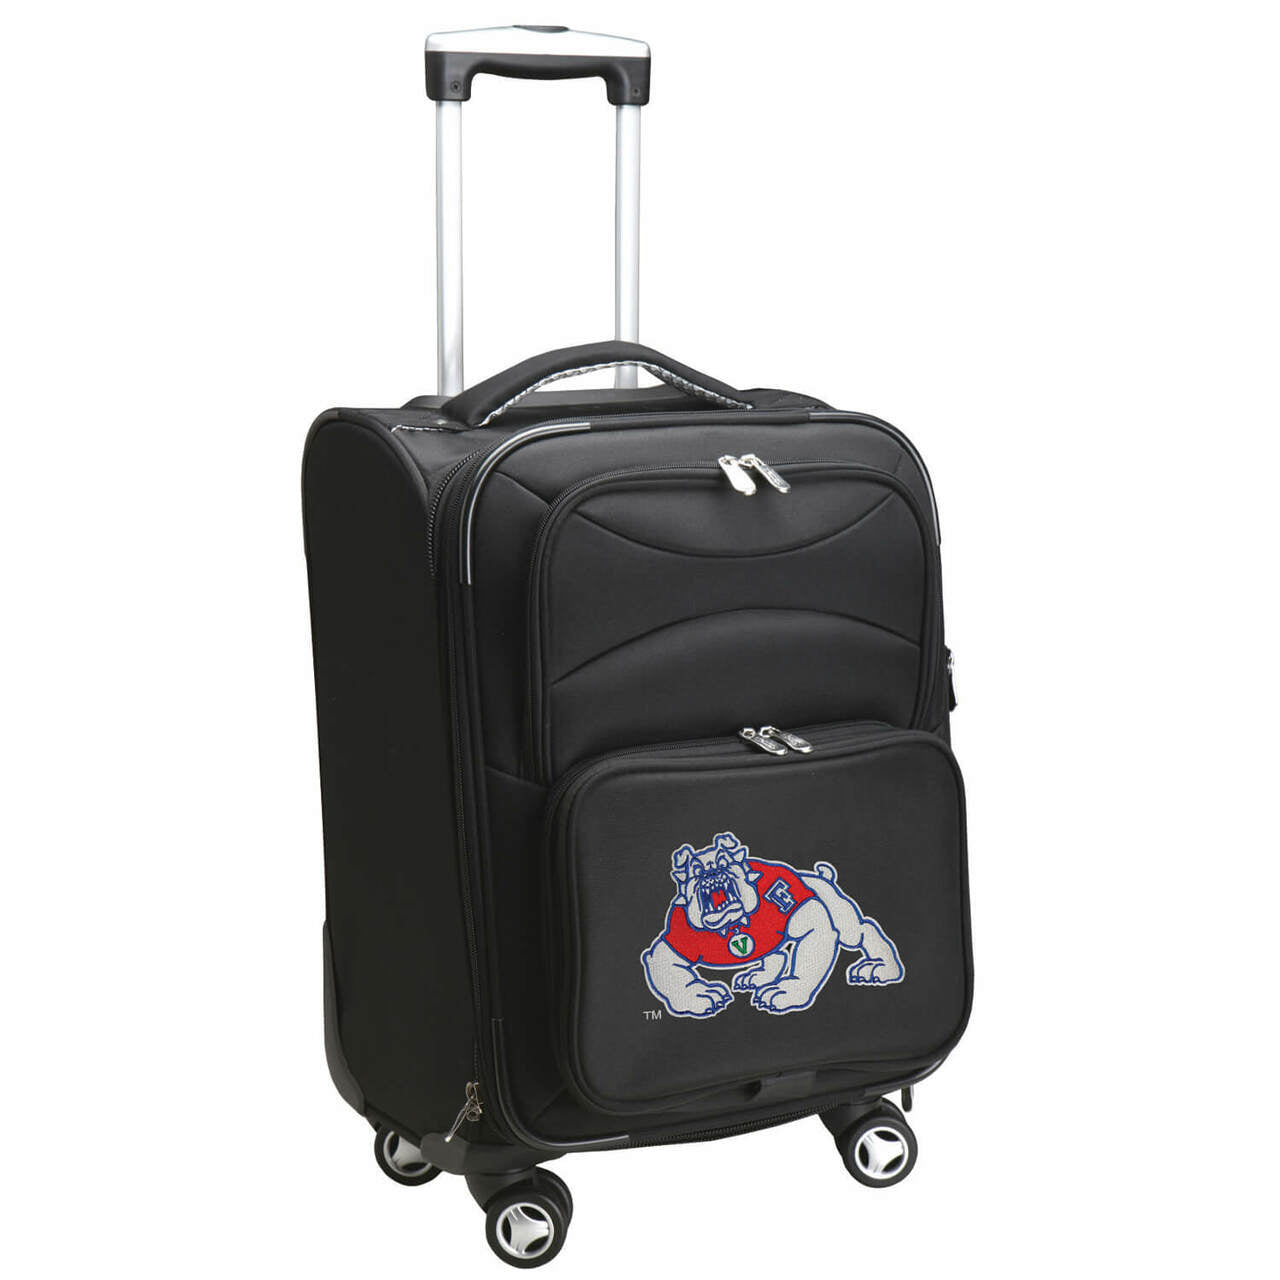 Bulldogs Luggage | Fresno State Bulldogs 20" Carry-on Spinner Luggage